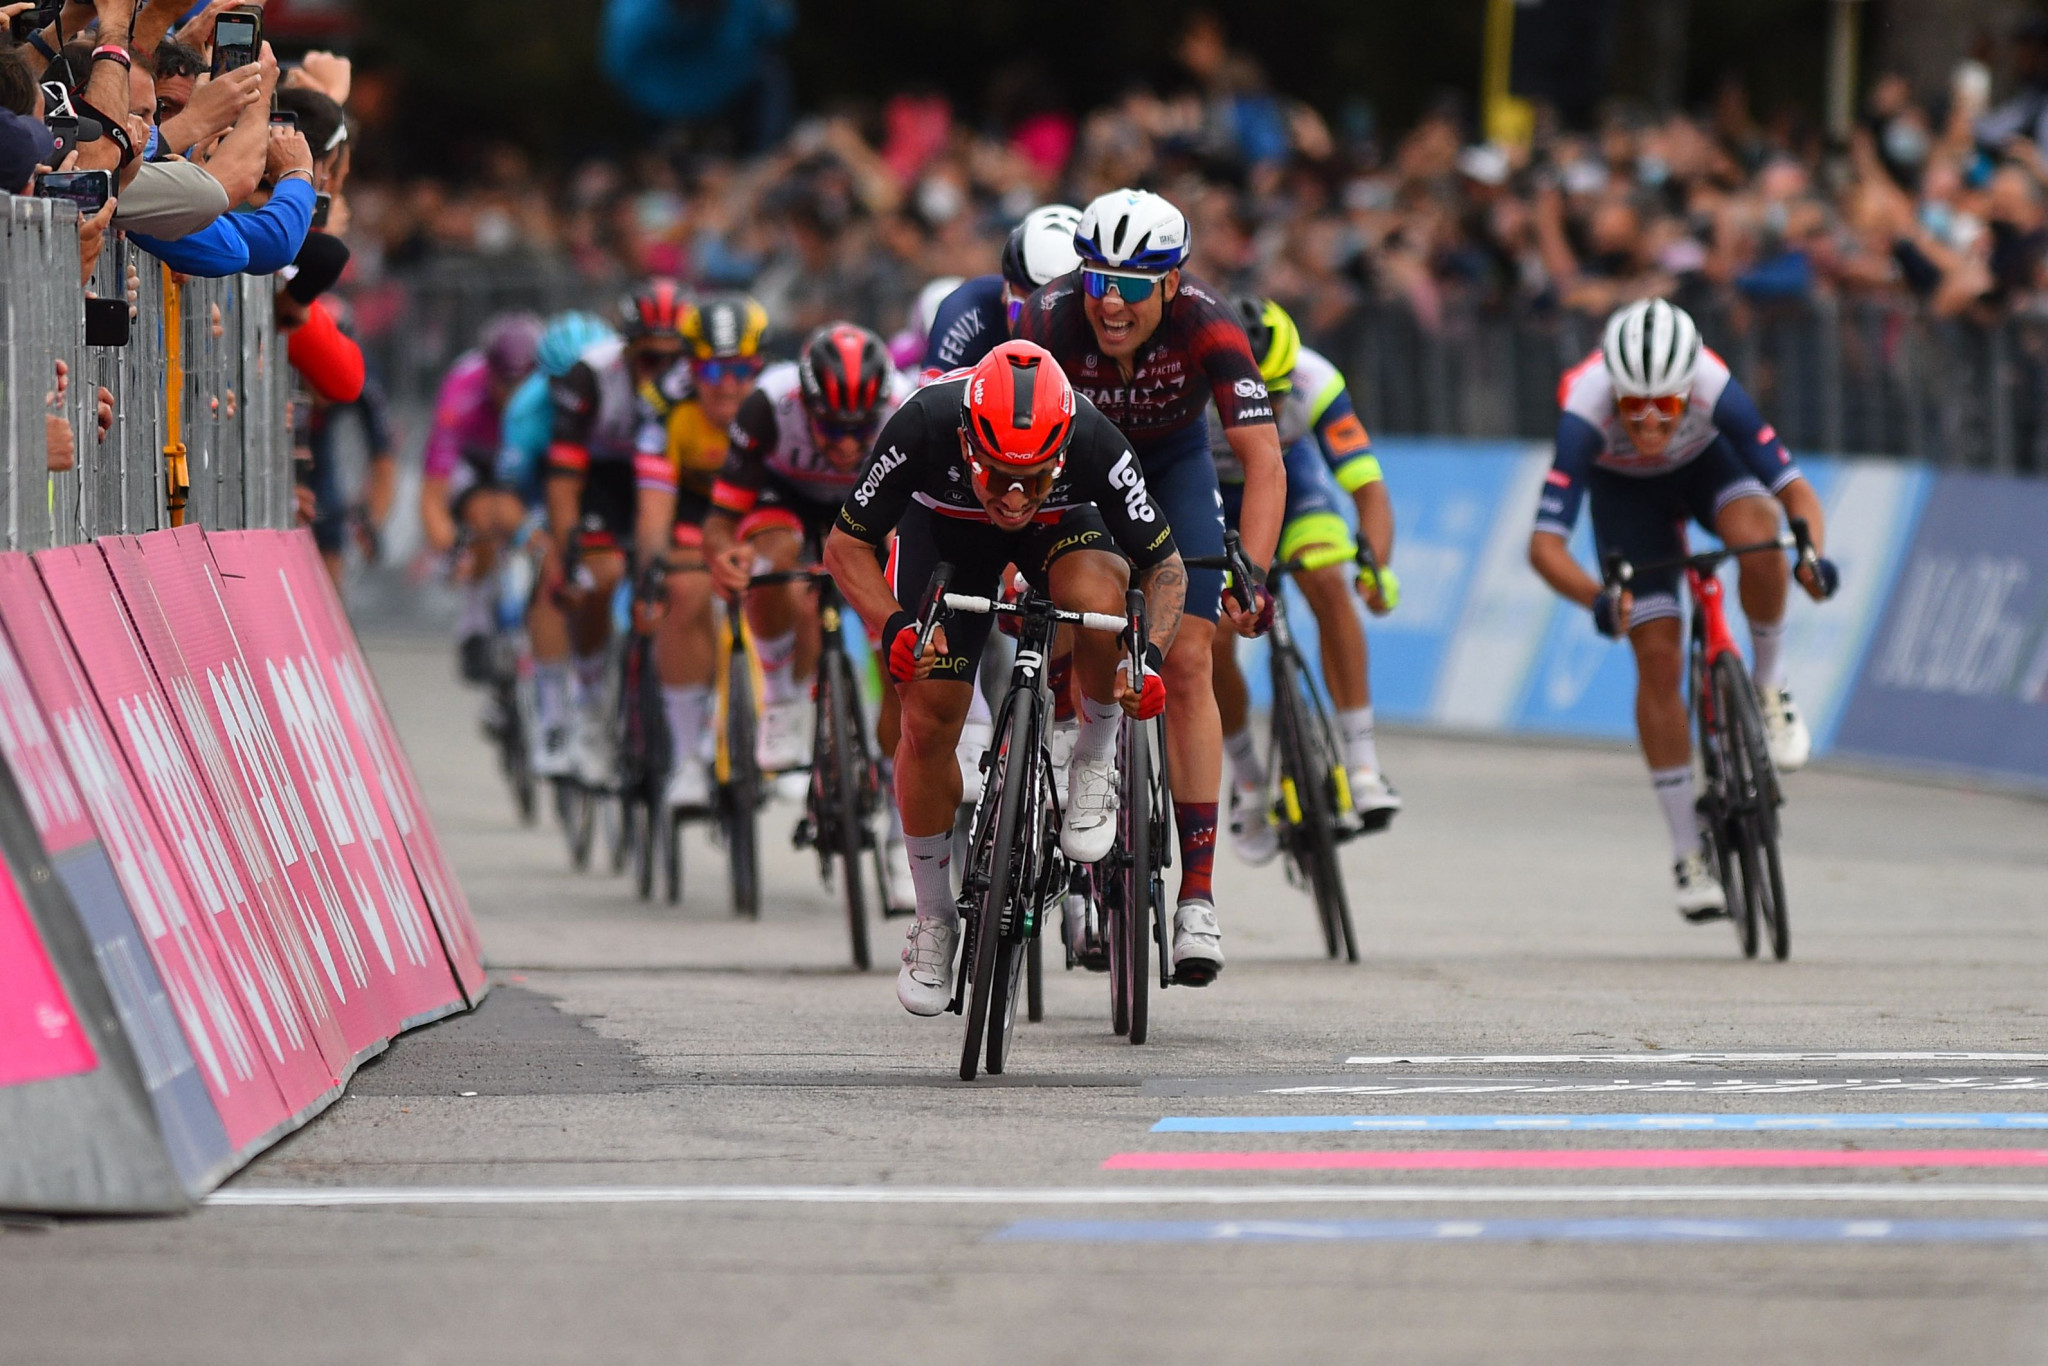 Ewan earns second stage win at Giro d’Italia with dominant finish in Termoli